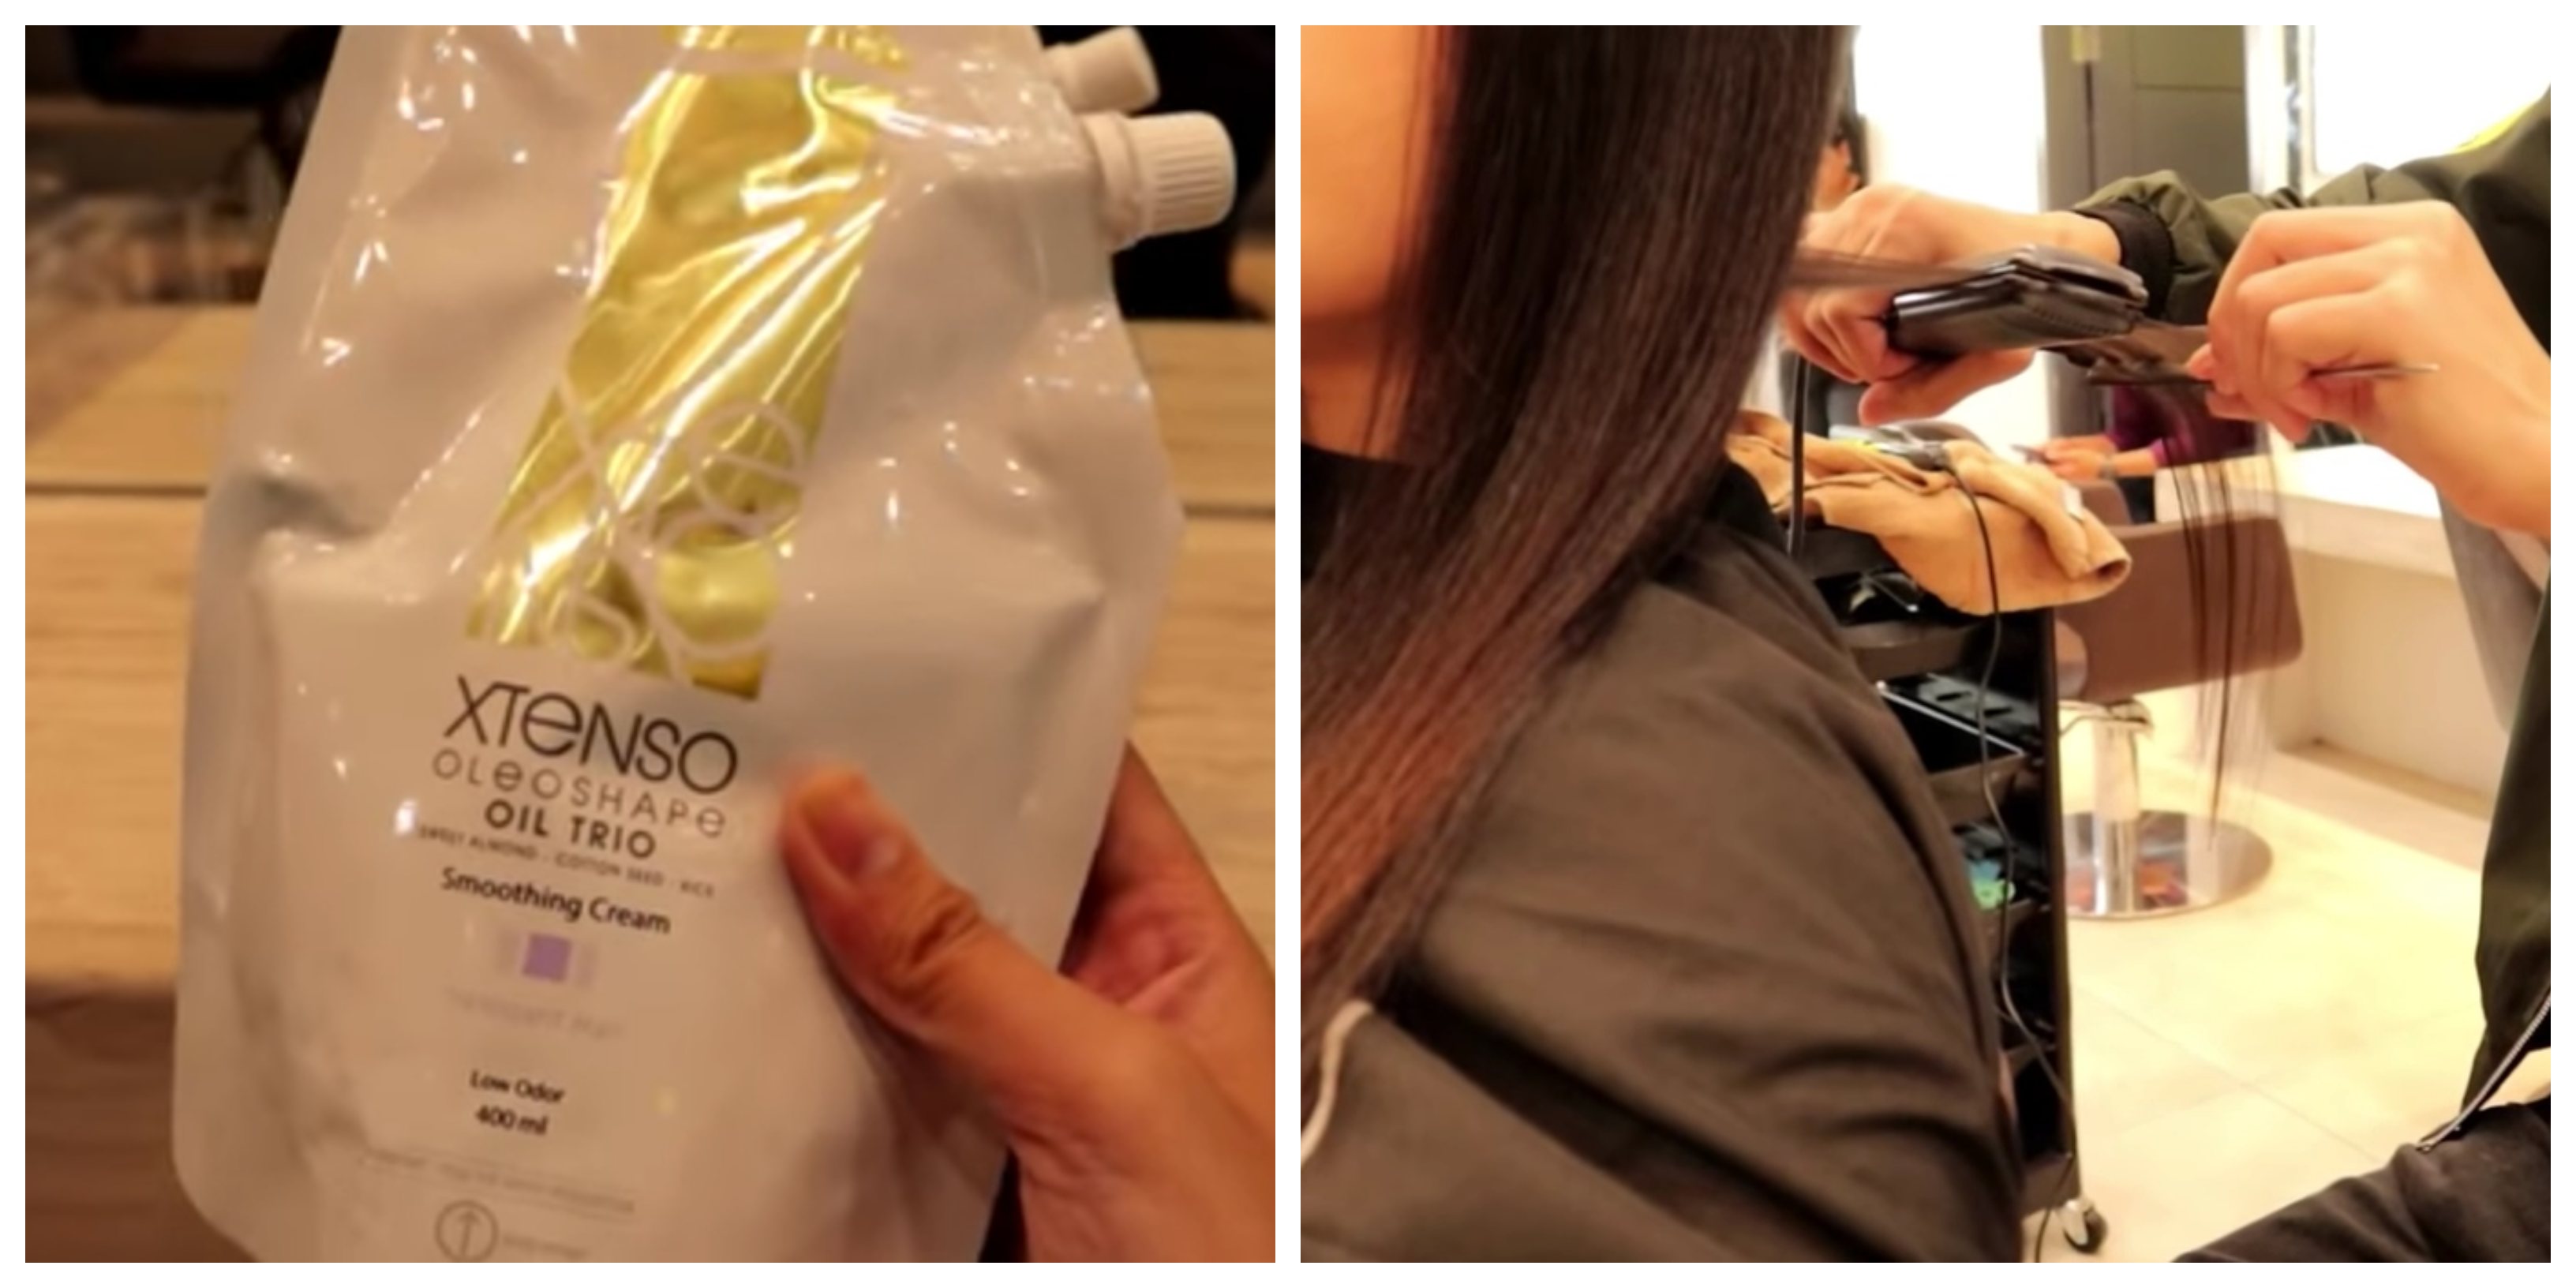 Vlogger Linexoxo (right) having her hair rebonded at a salon. Left is the rebonding cream used on her hair. Screenshot from Line xoxo's YouTube video